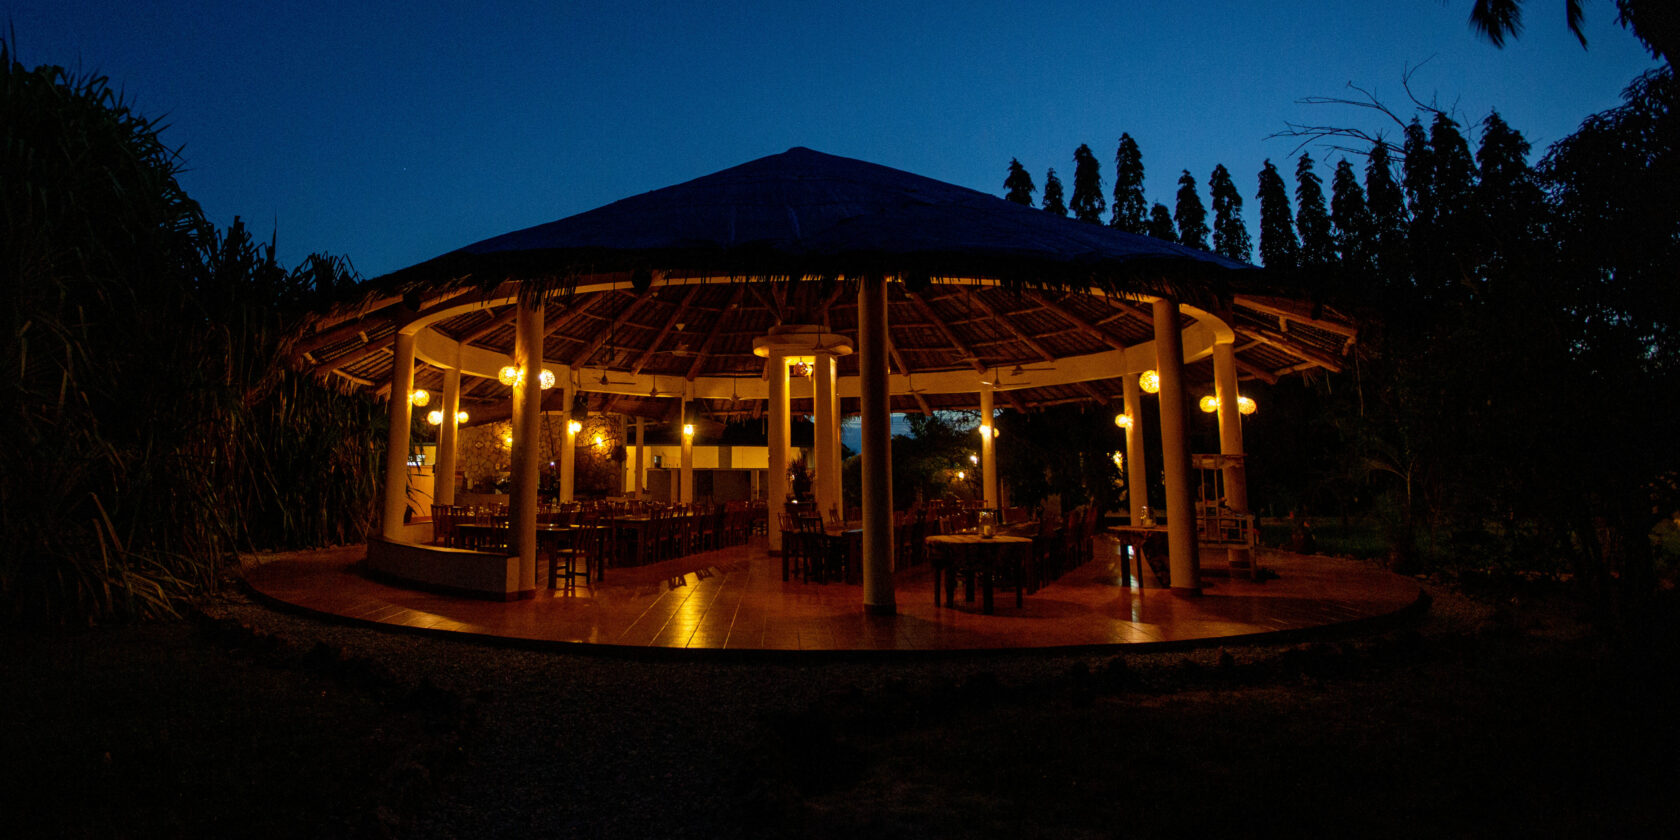 The makuti roof with the dining place beneath alit in the night